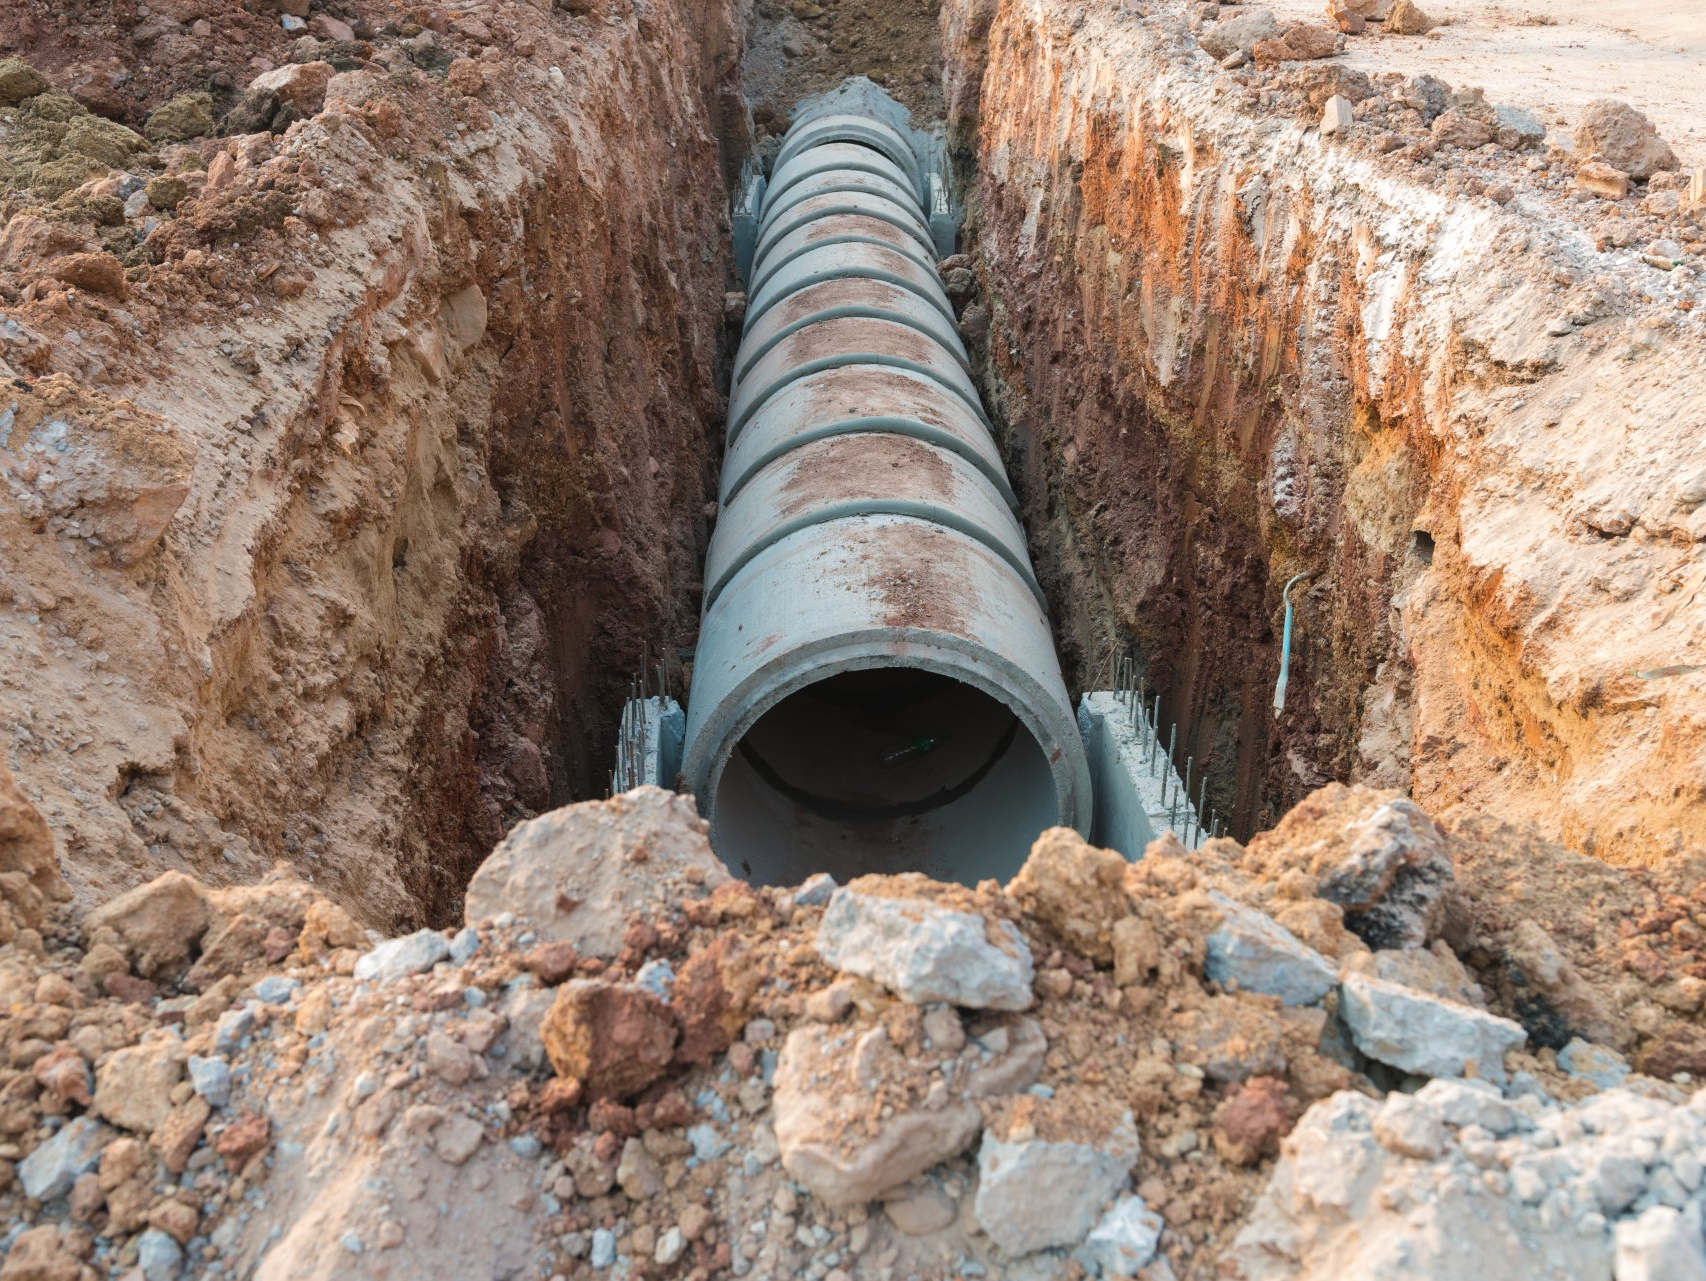 Concrete drainage pipe - Carbondale, CO - B&R Septic and Drain Service